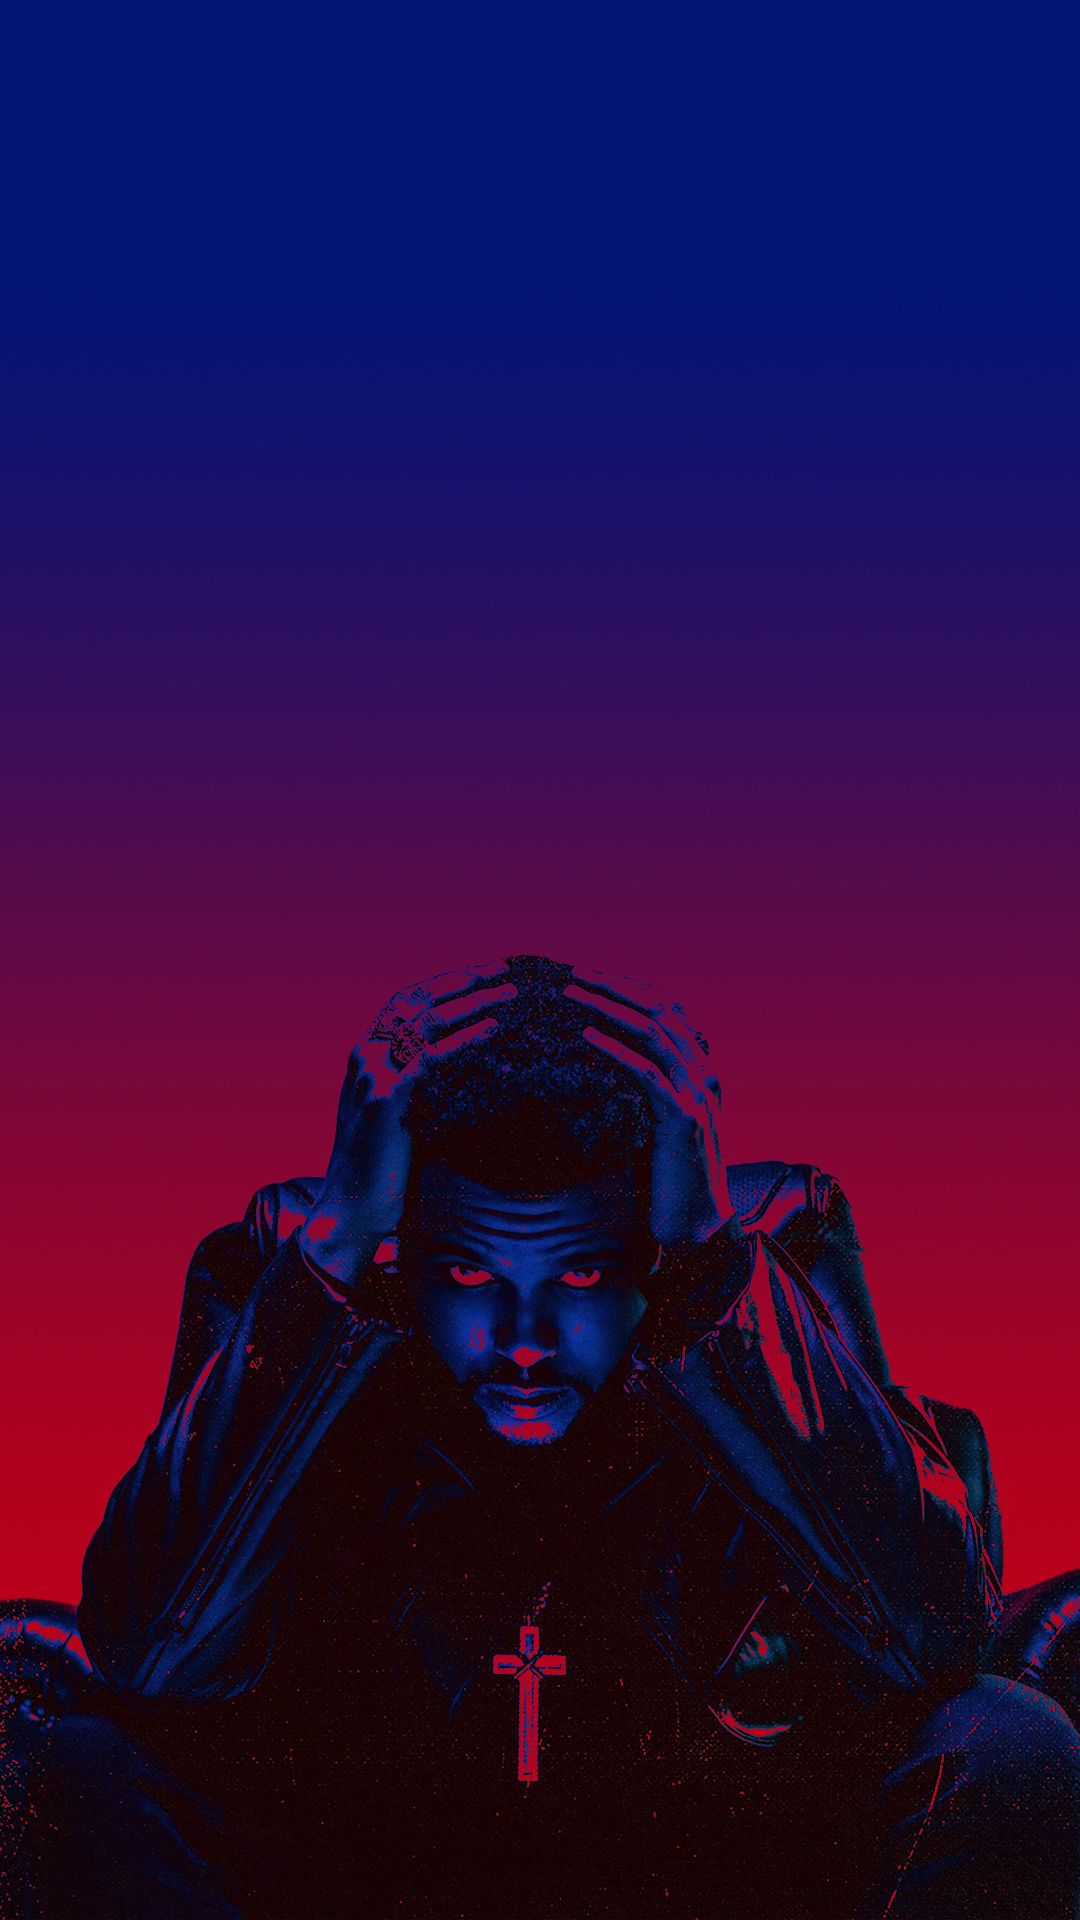 A man sitting on the ground with his hands over head - The Weeknd